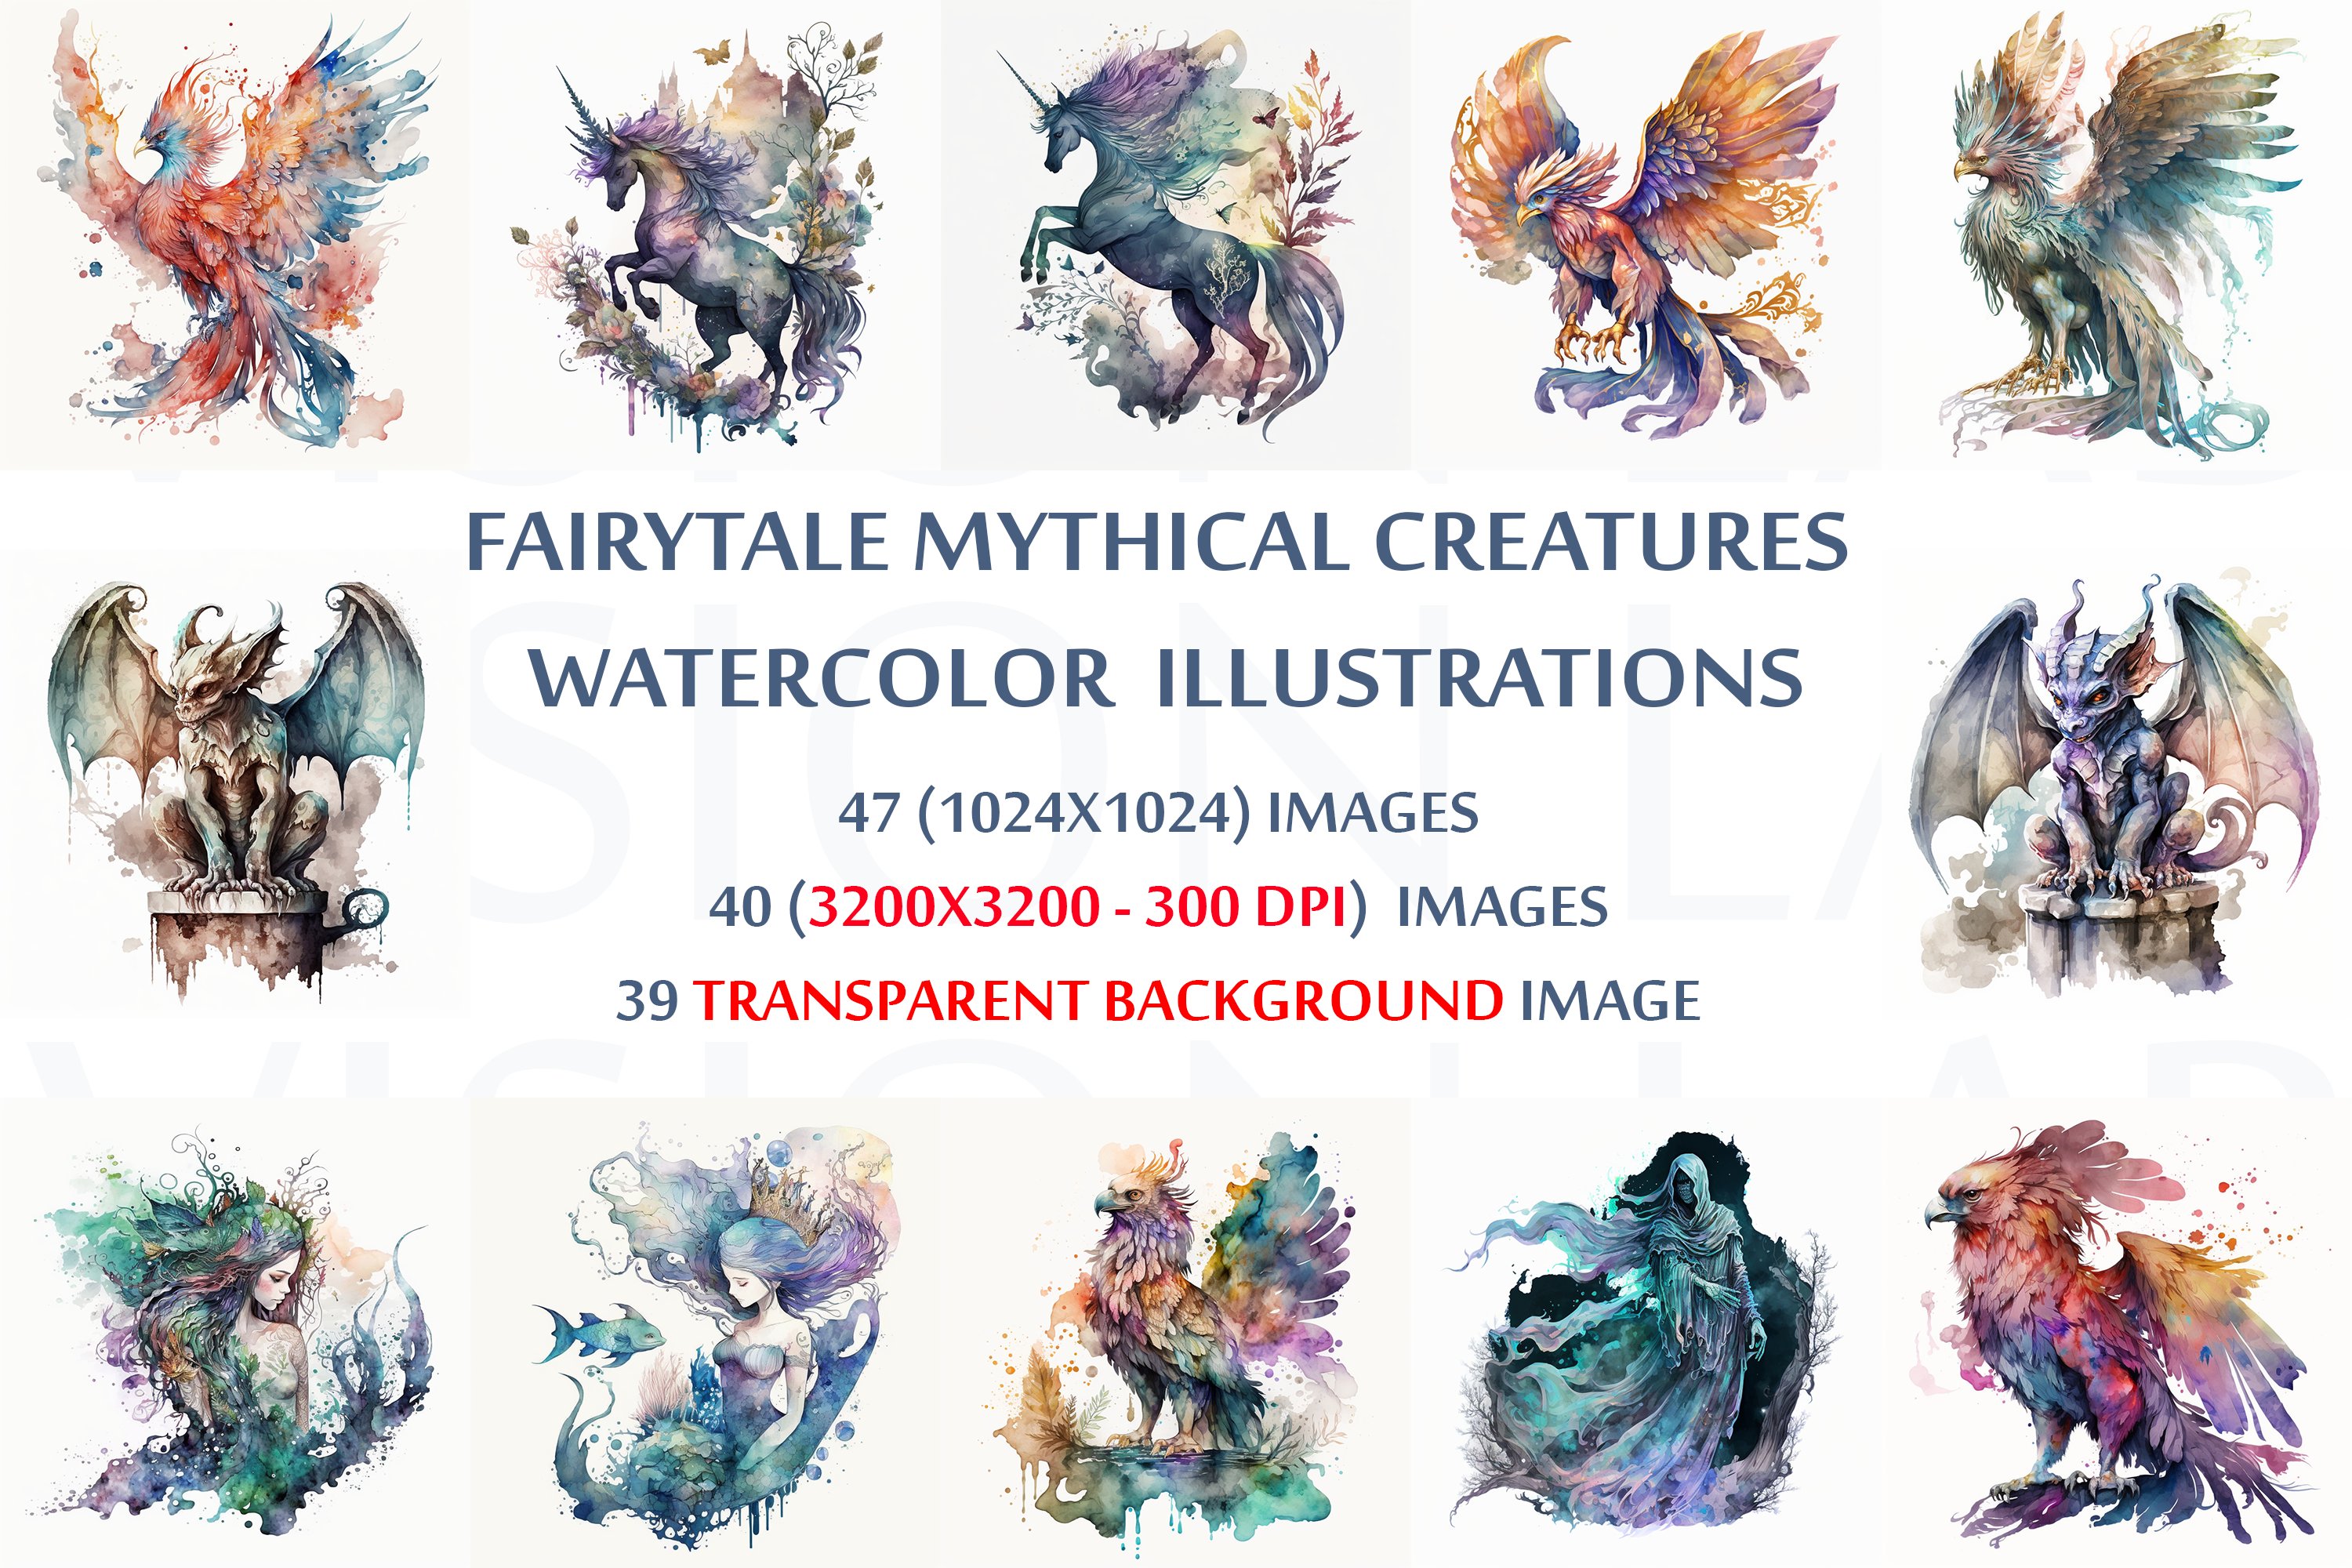 Mythical Creatures: Magical World cover image.